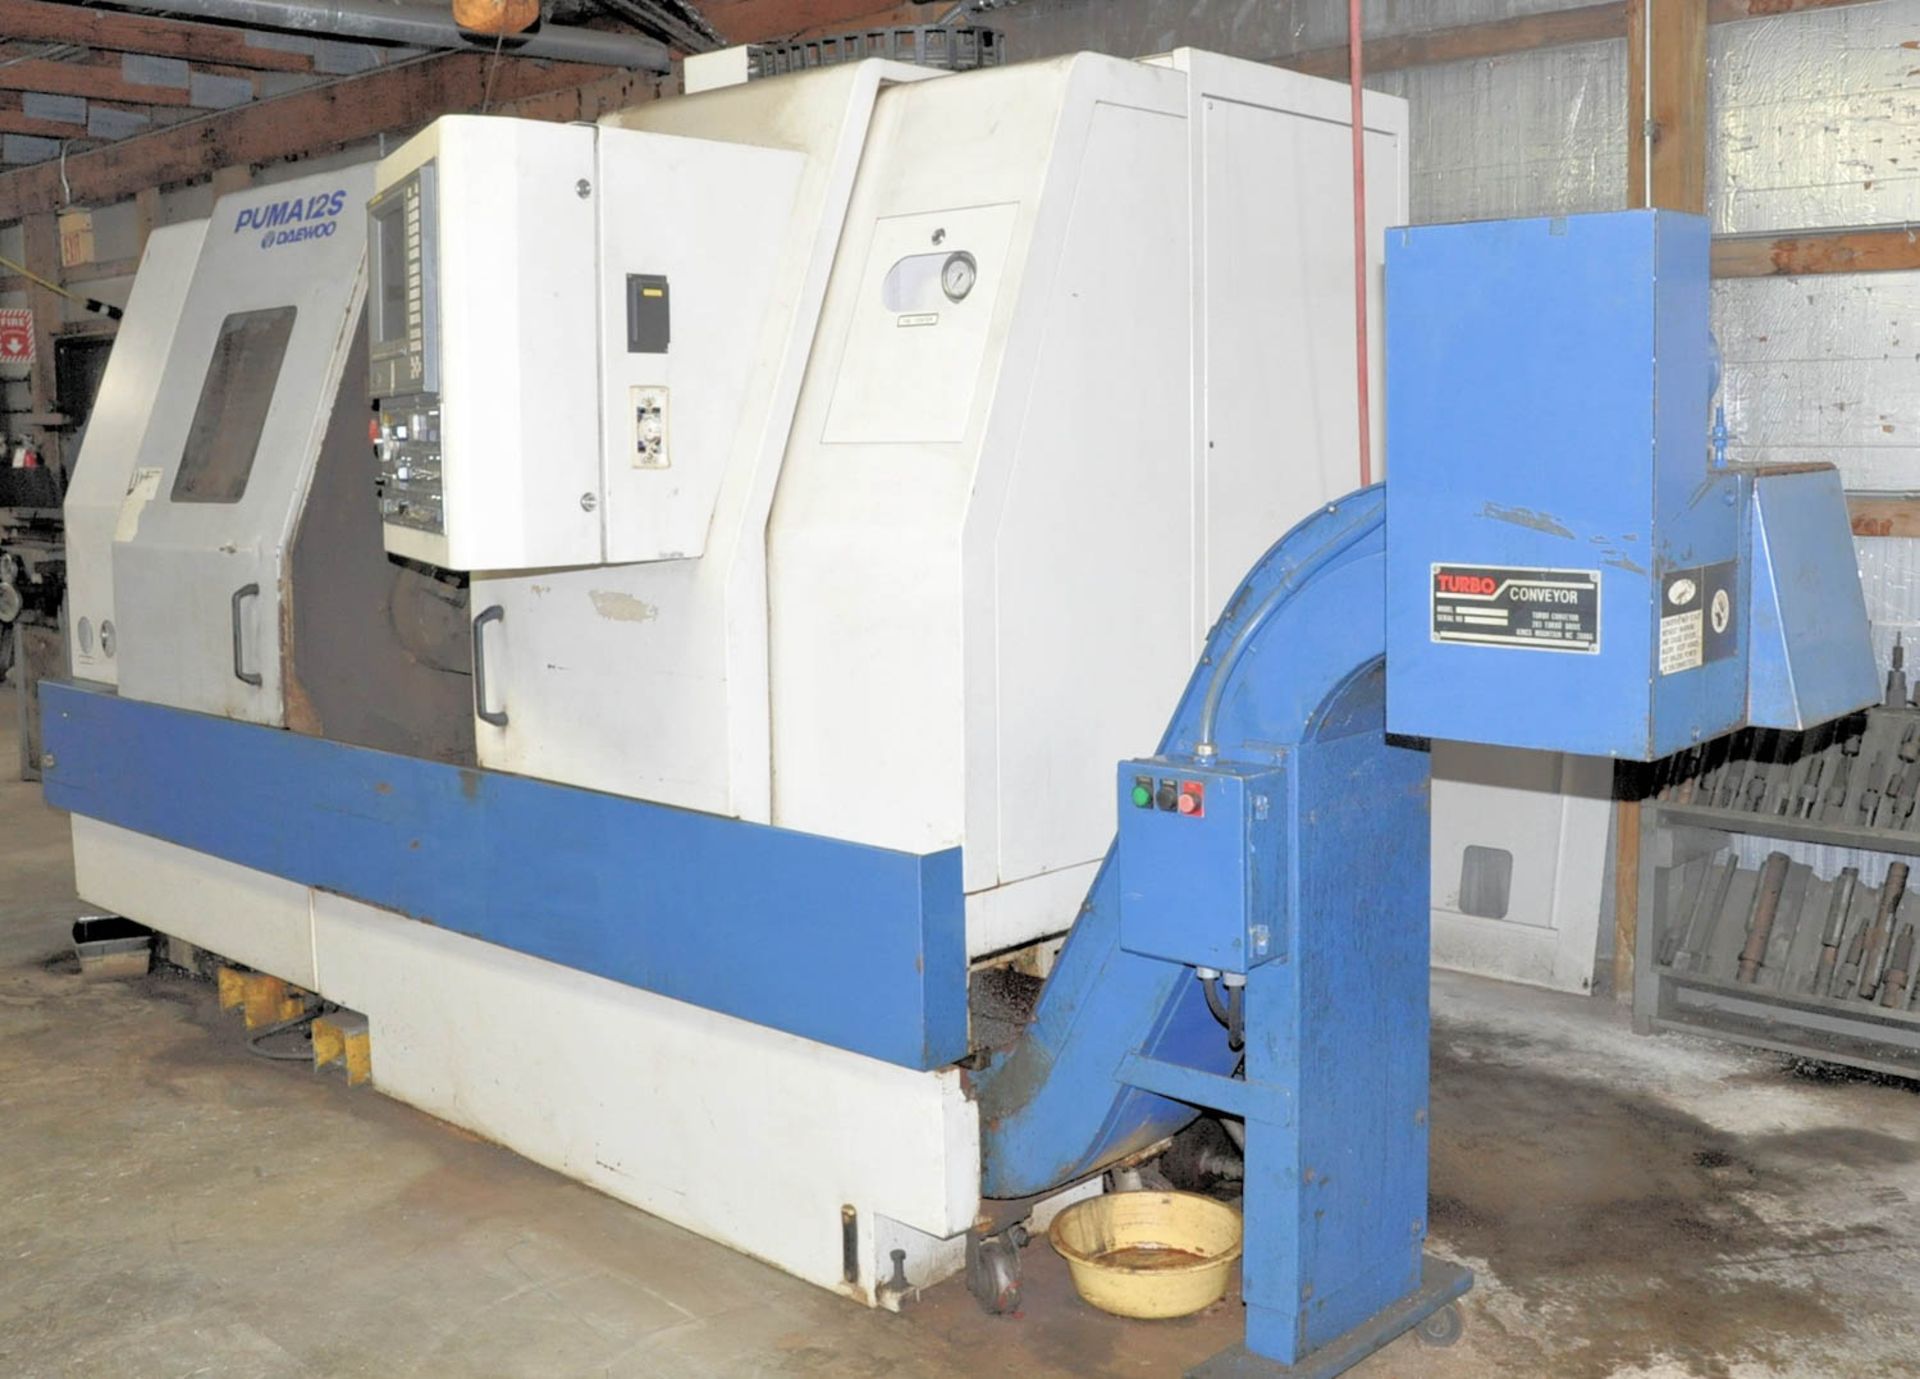 DAEWOO PUMA MDL. 12S LATHE, WITH FANUC SERIES 18-T CNC CONTROLLER, 3" THRU SPINDLE, 18" X 30" - Image 6 of 9